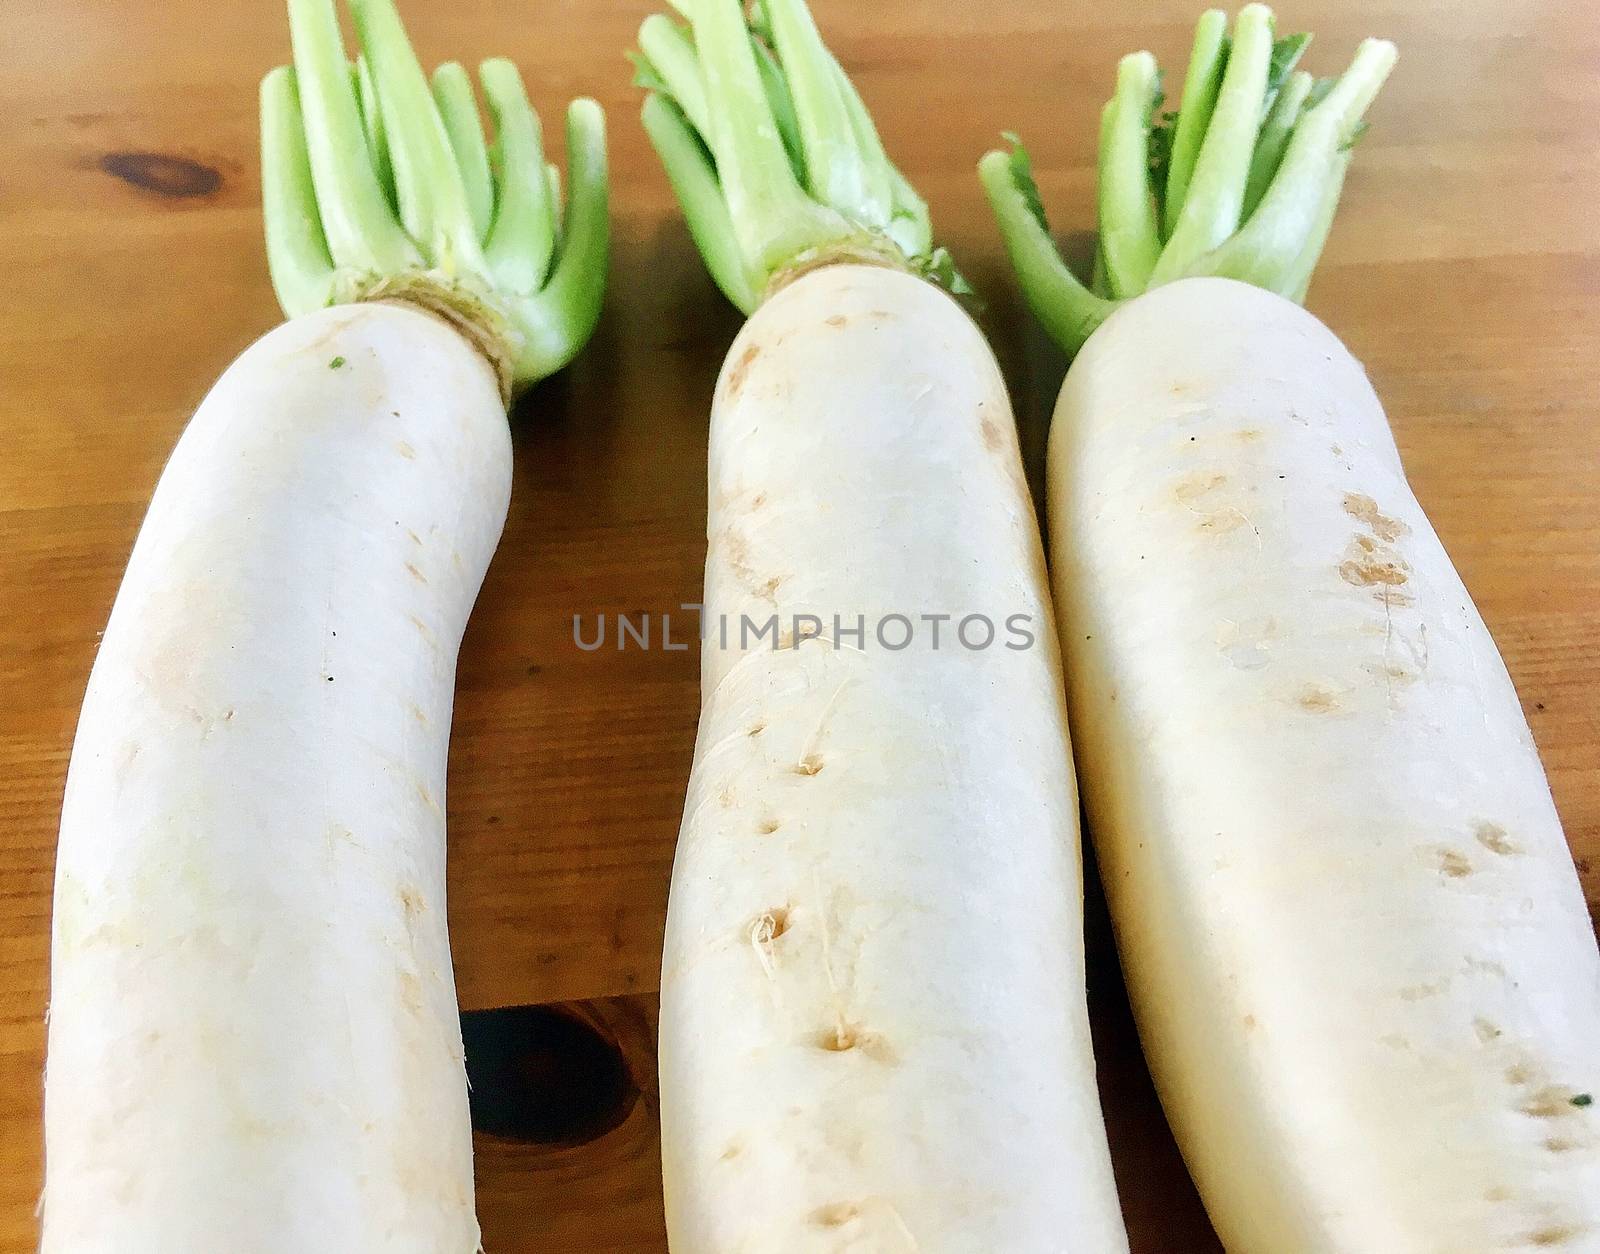 Fresh three white radishes putting on the wooden table in kitchen